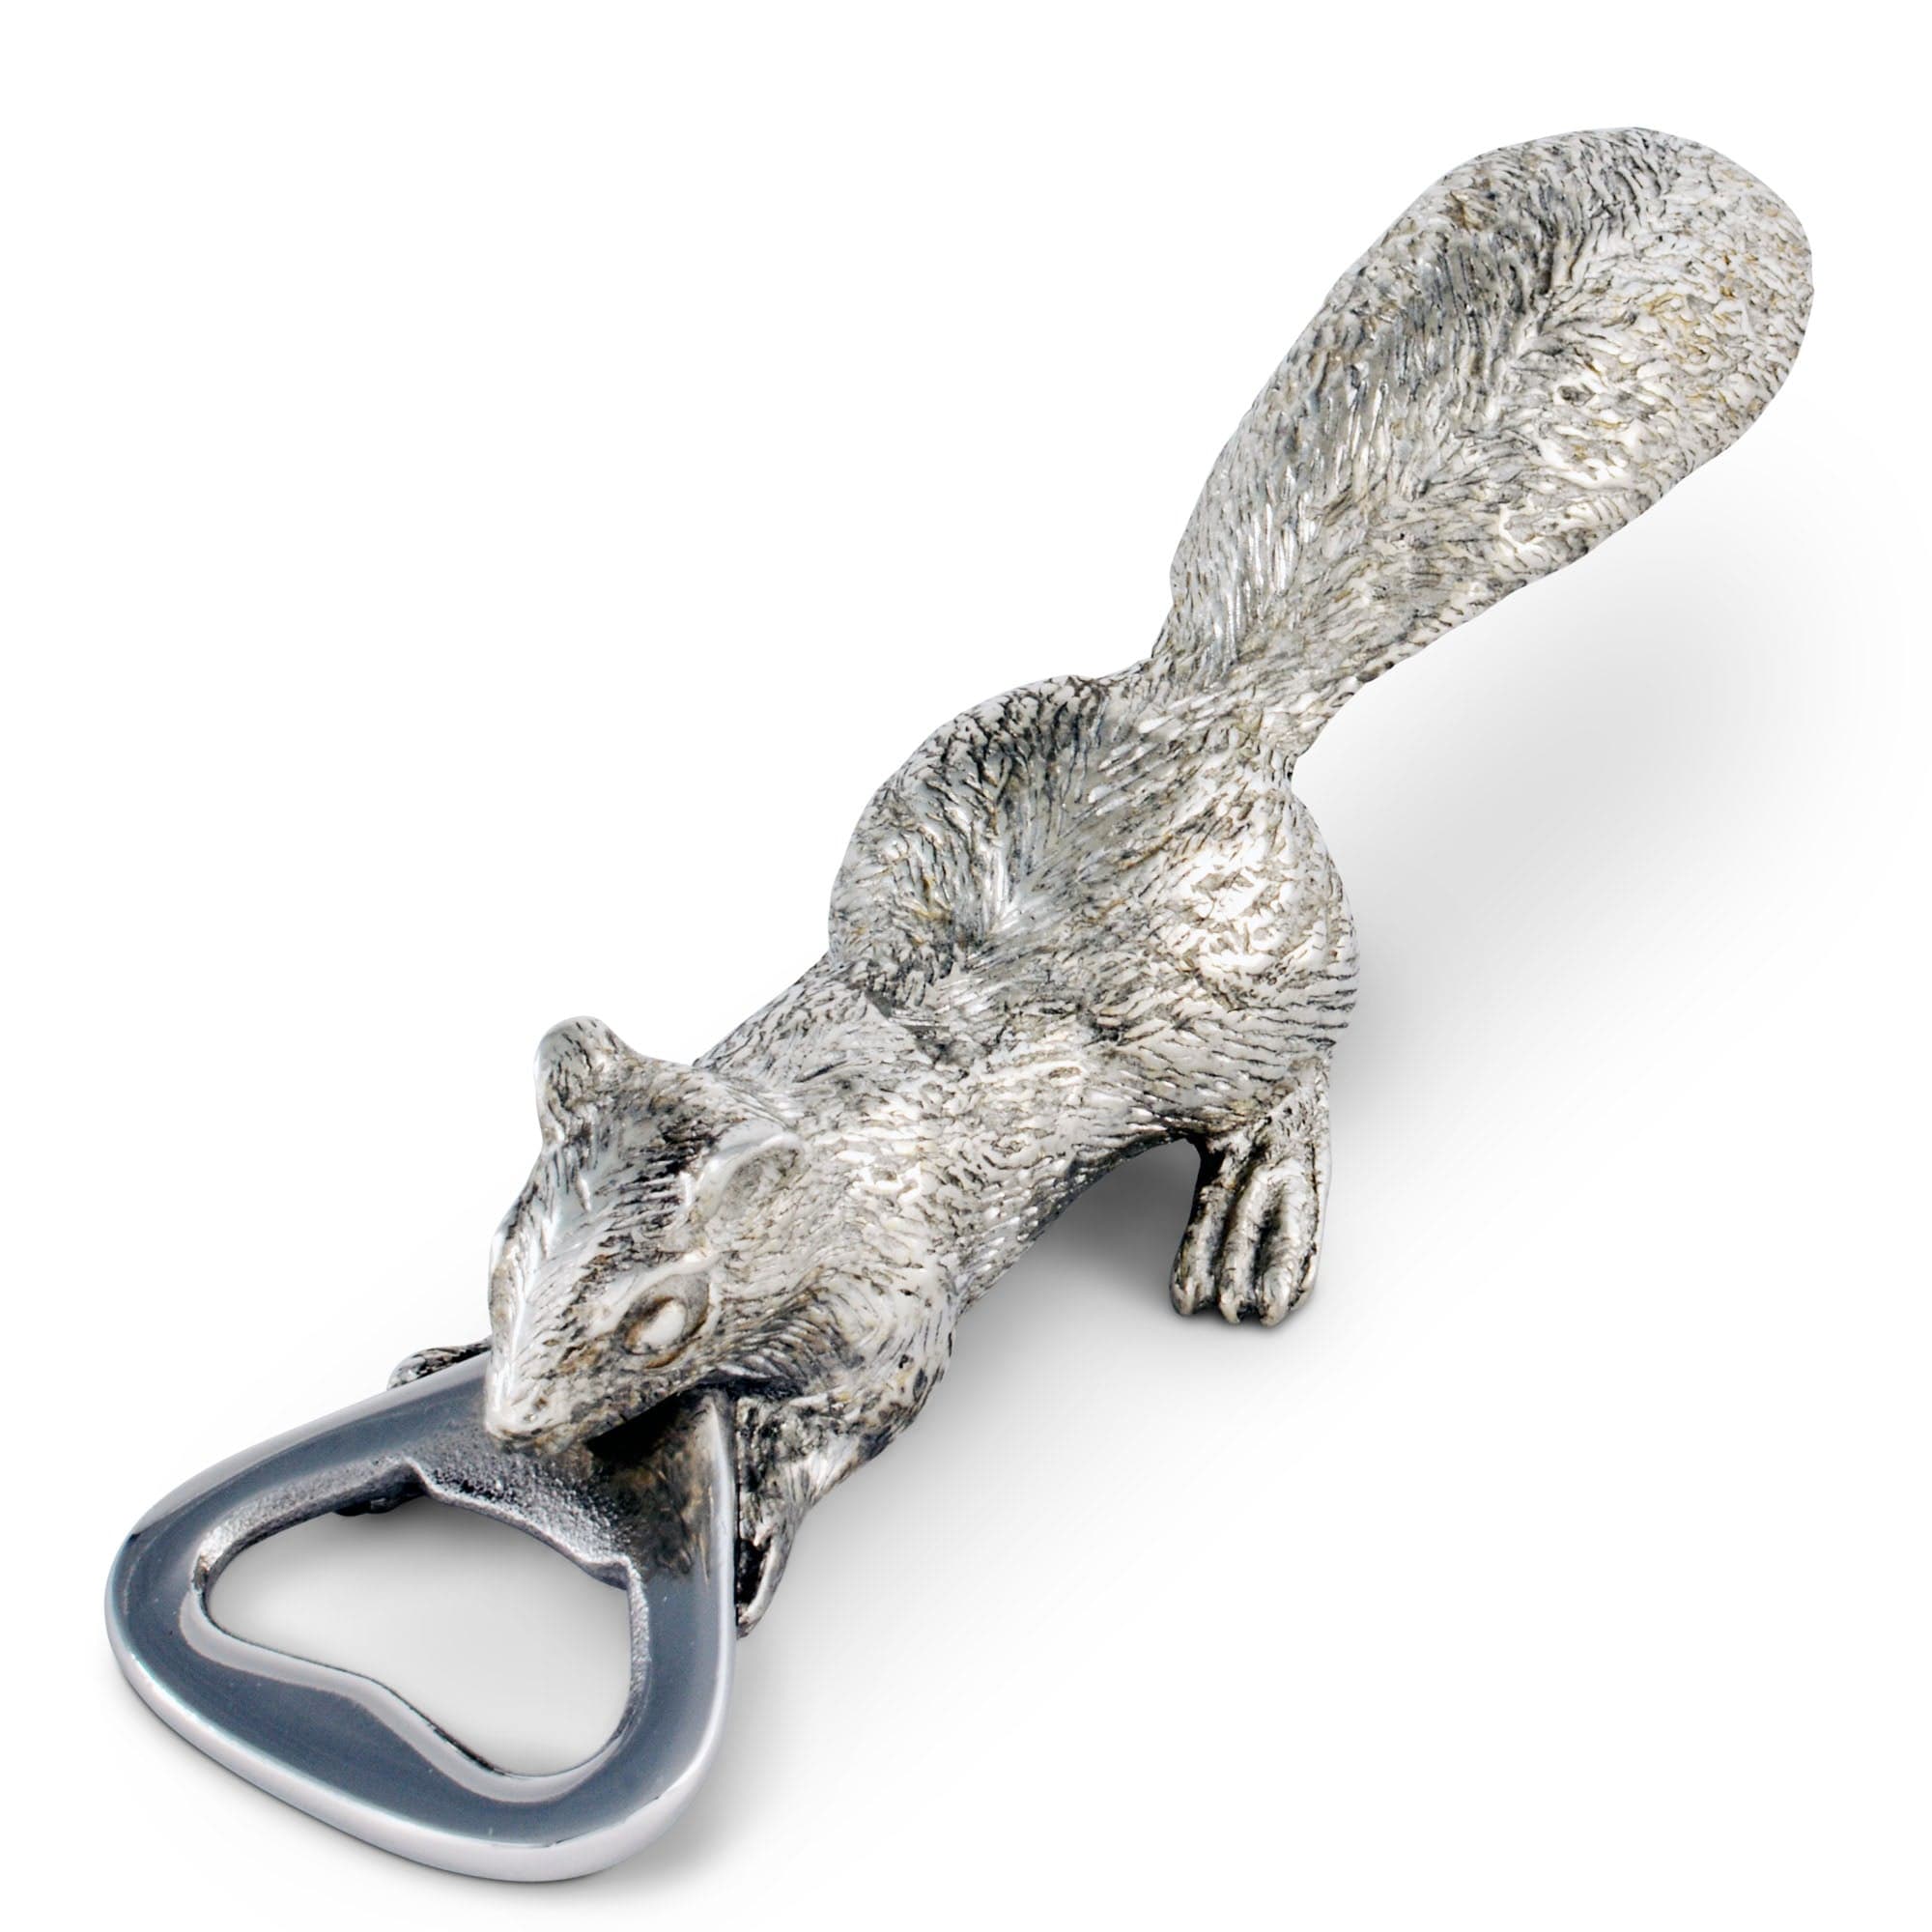 https://cdn.shopify.com/s/files/1/1994/6745/products/vagabond-house-woodland-creatures-squirrel-pewter-bottle-opener-s9s-31279436136496_2000x.jpg?v=1678099950